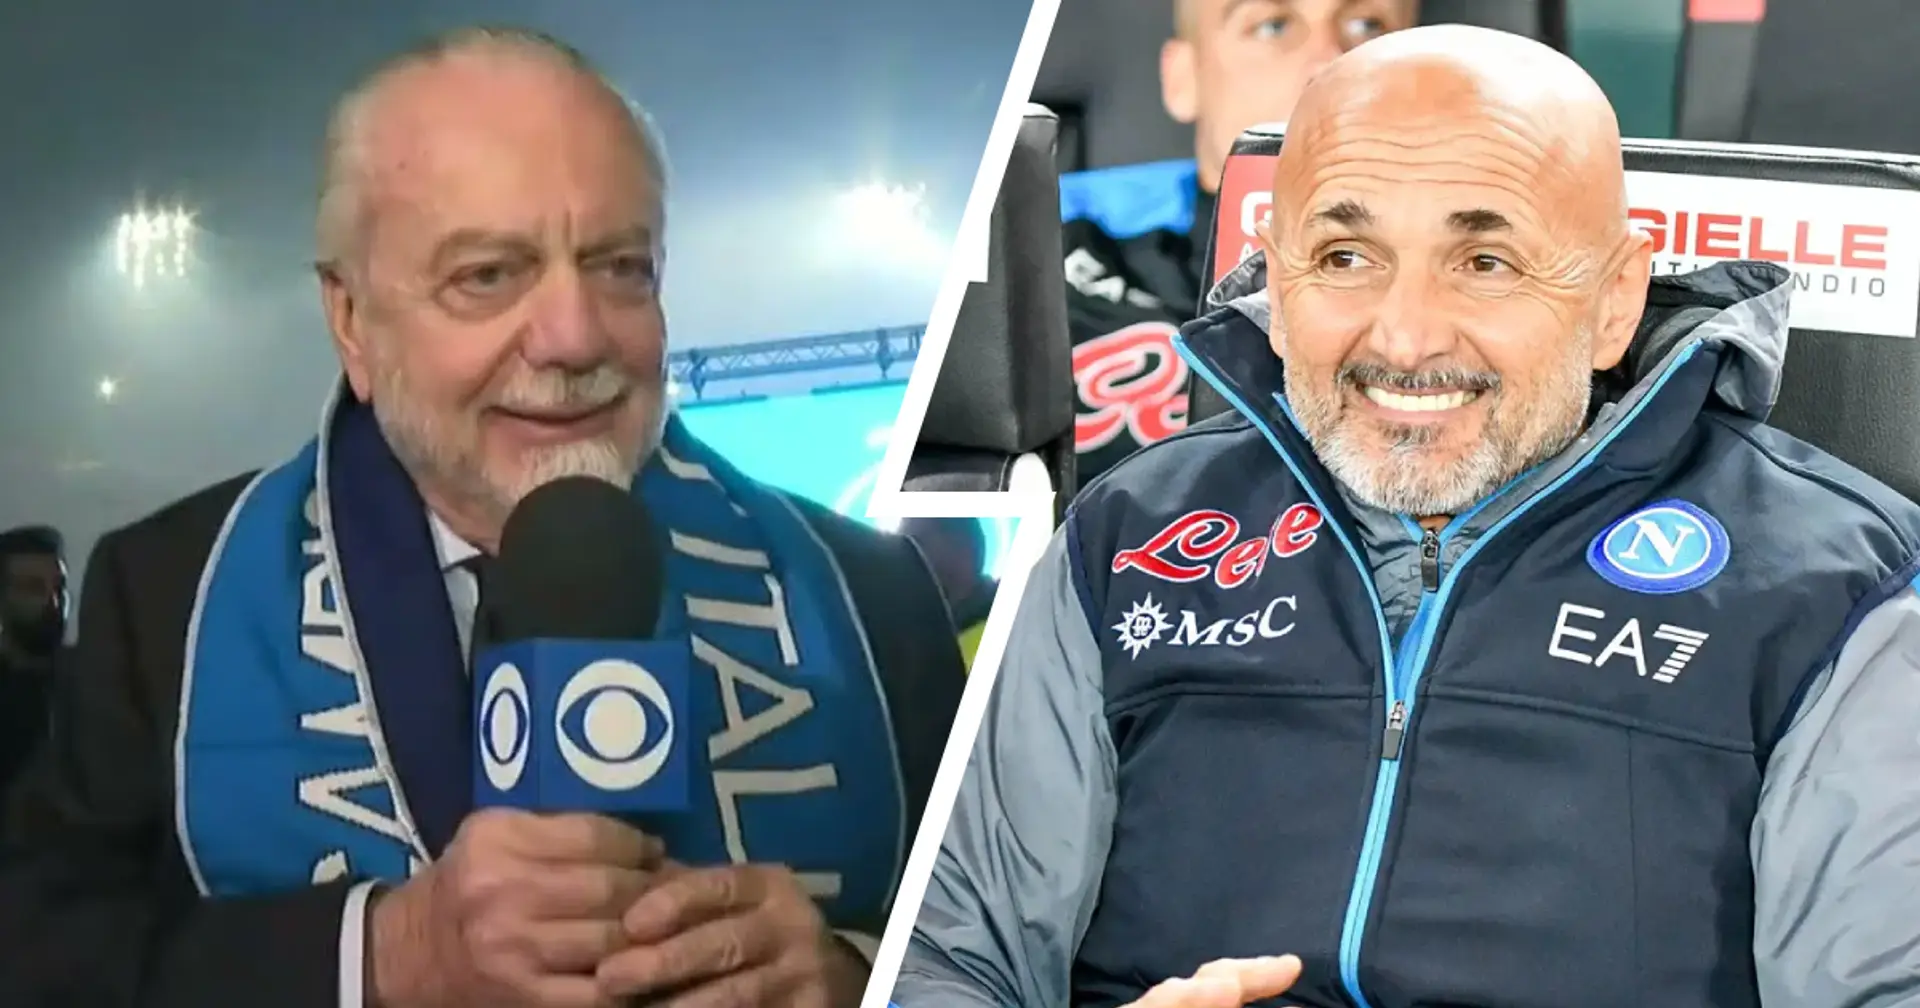 'Being in Naples is a privilege, not an obligation': Napoli president De Laurentiis on Spalletti amid exit rumours